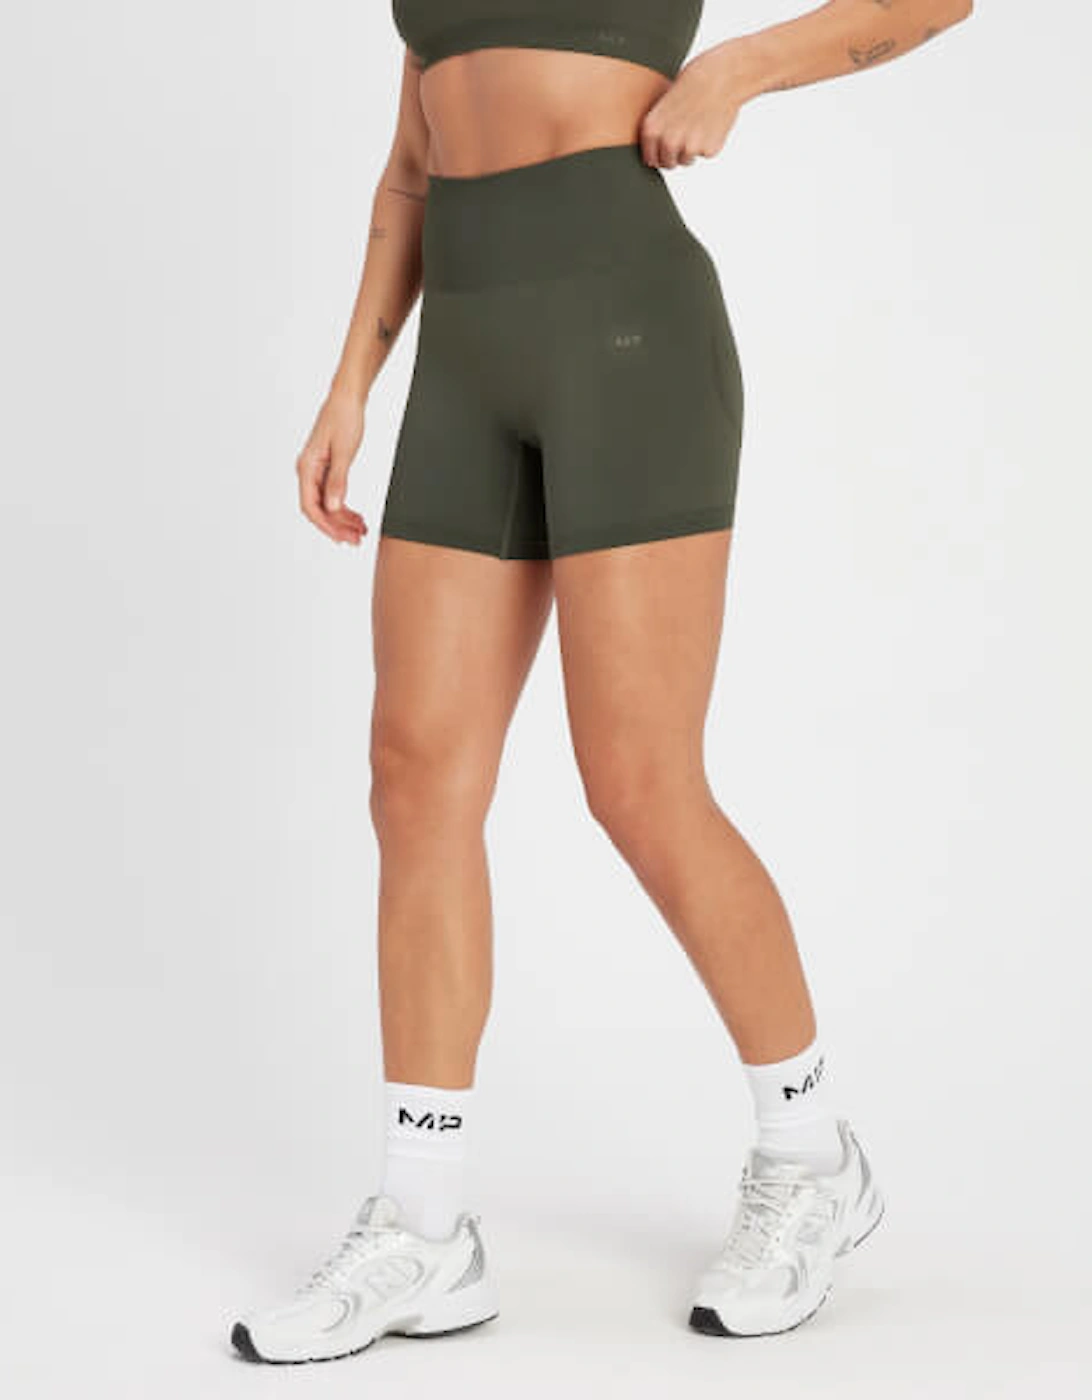 Women's Rest Day Seamless Booty Short - Taupe Green, 3 of 2